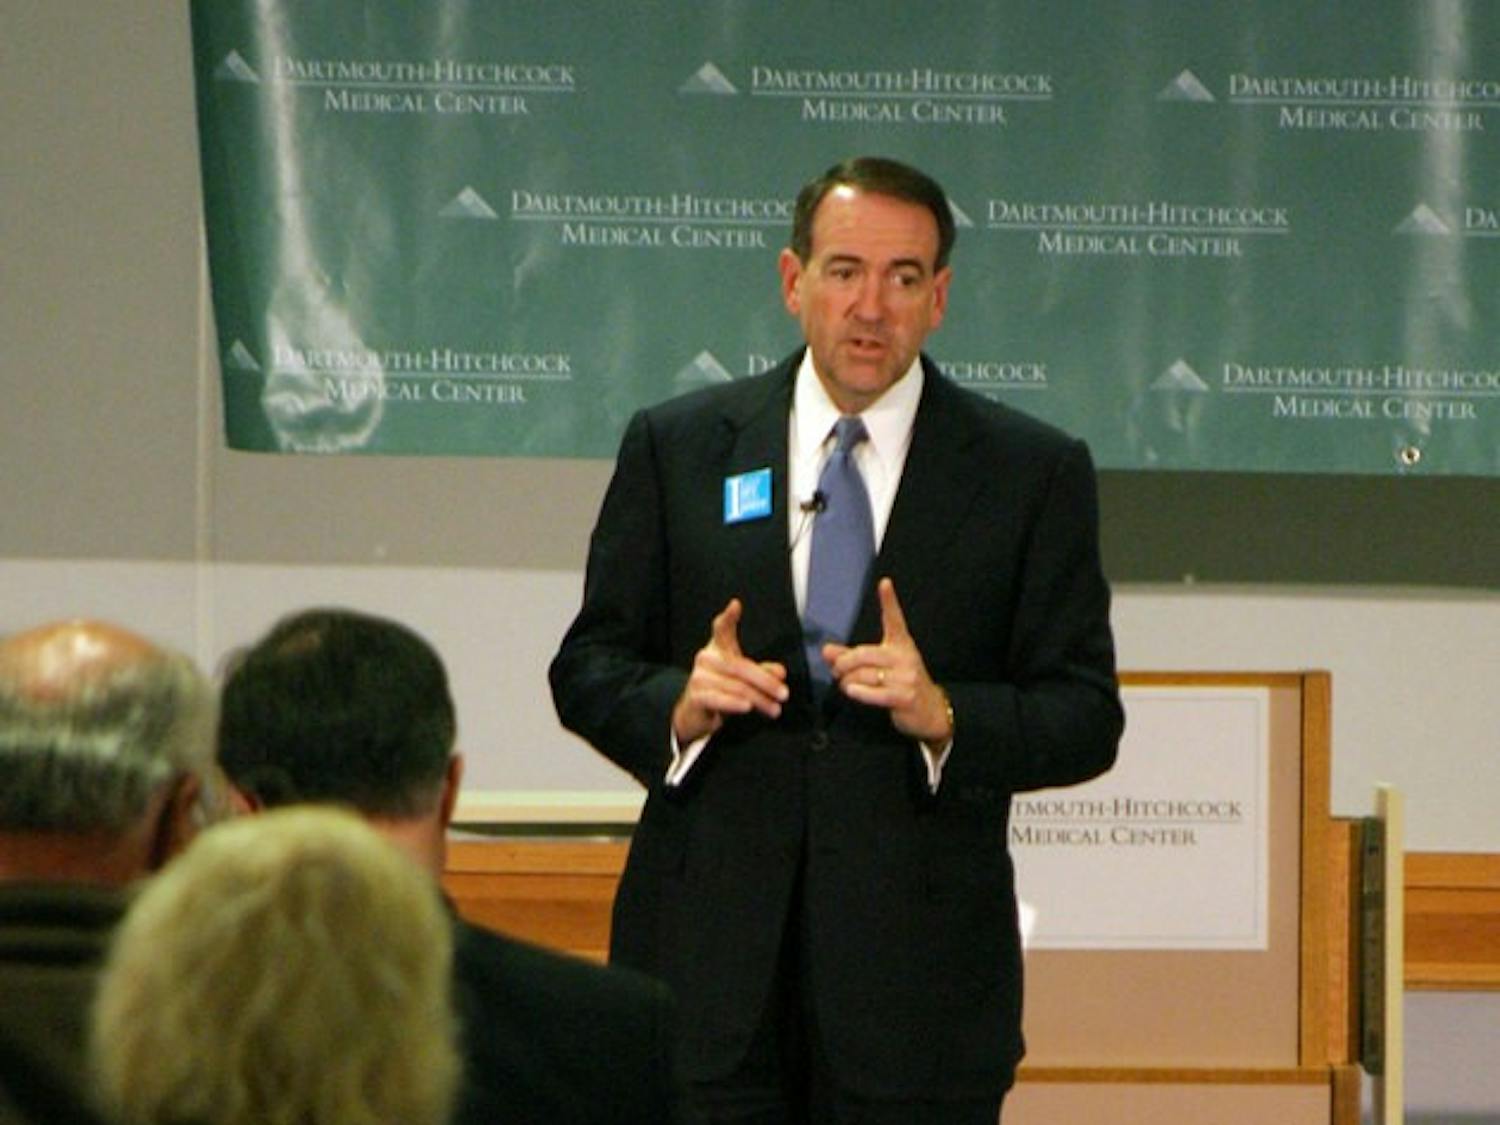 Presidential hopeful and former governor Mike Huckabee, R-Ark., addressed residents, doctors and staff of Dartmouth-Hitchcock Medical Center Friday.